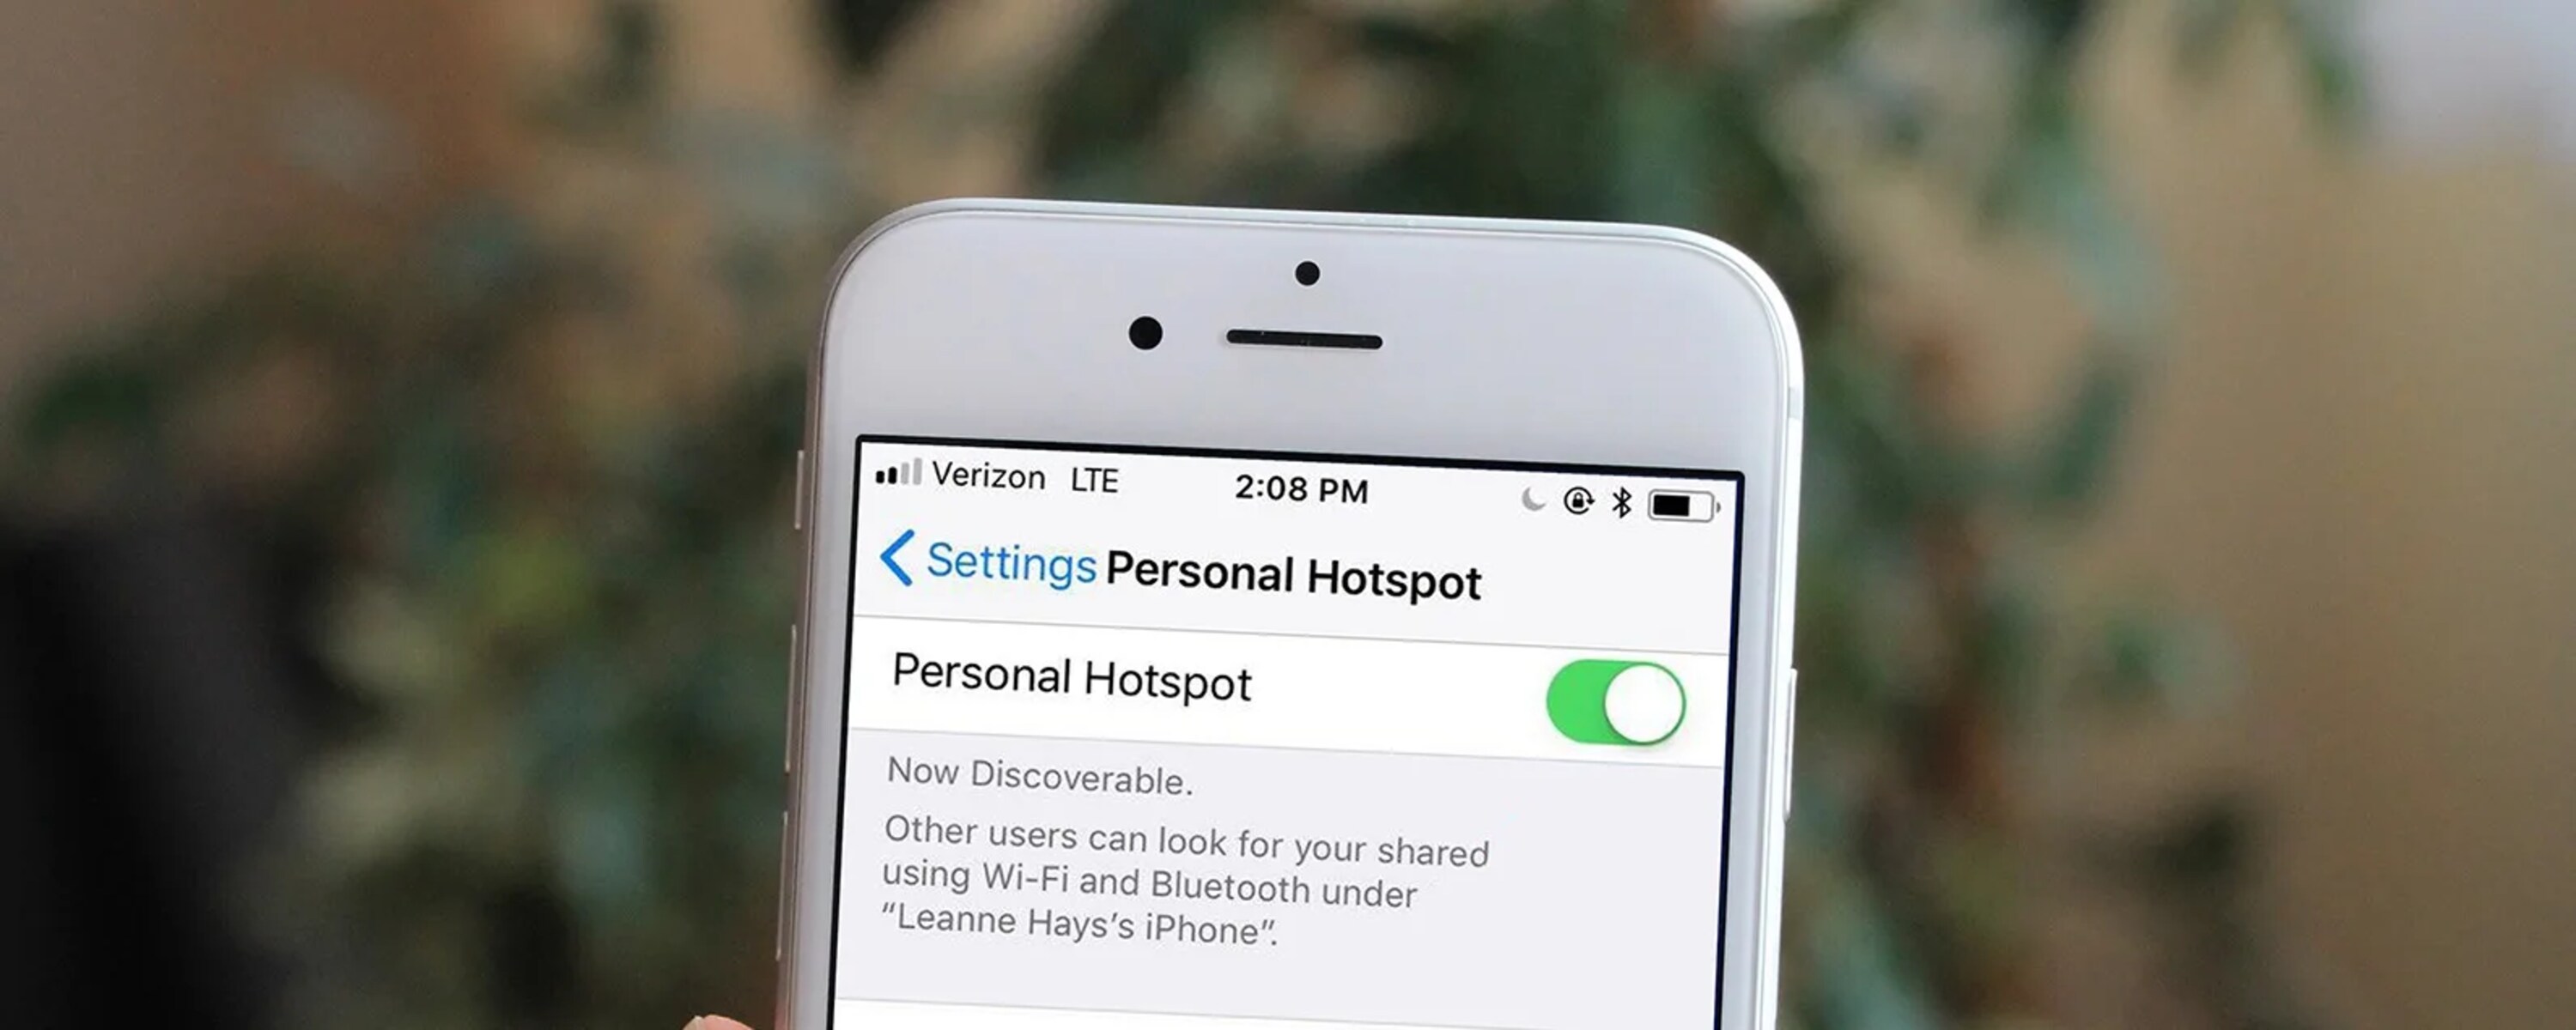 Disabling Hotspot On IPhone: Quick Instructions